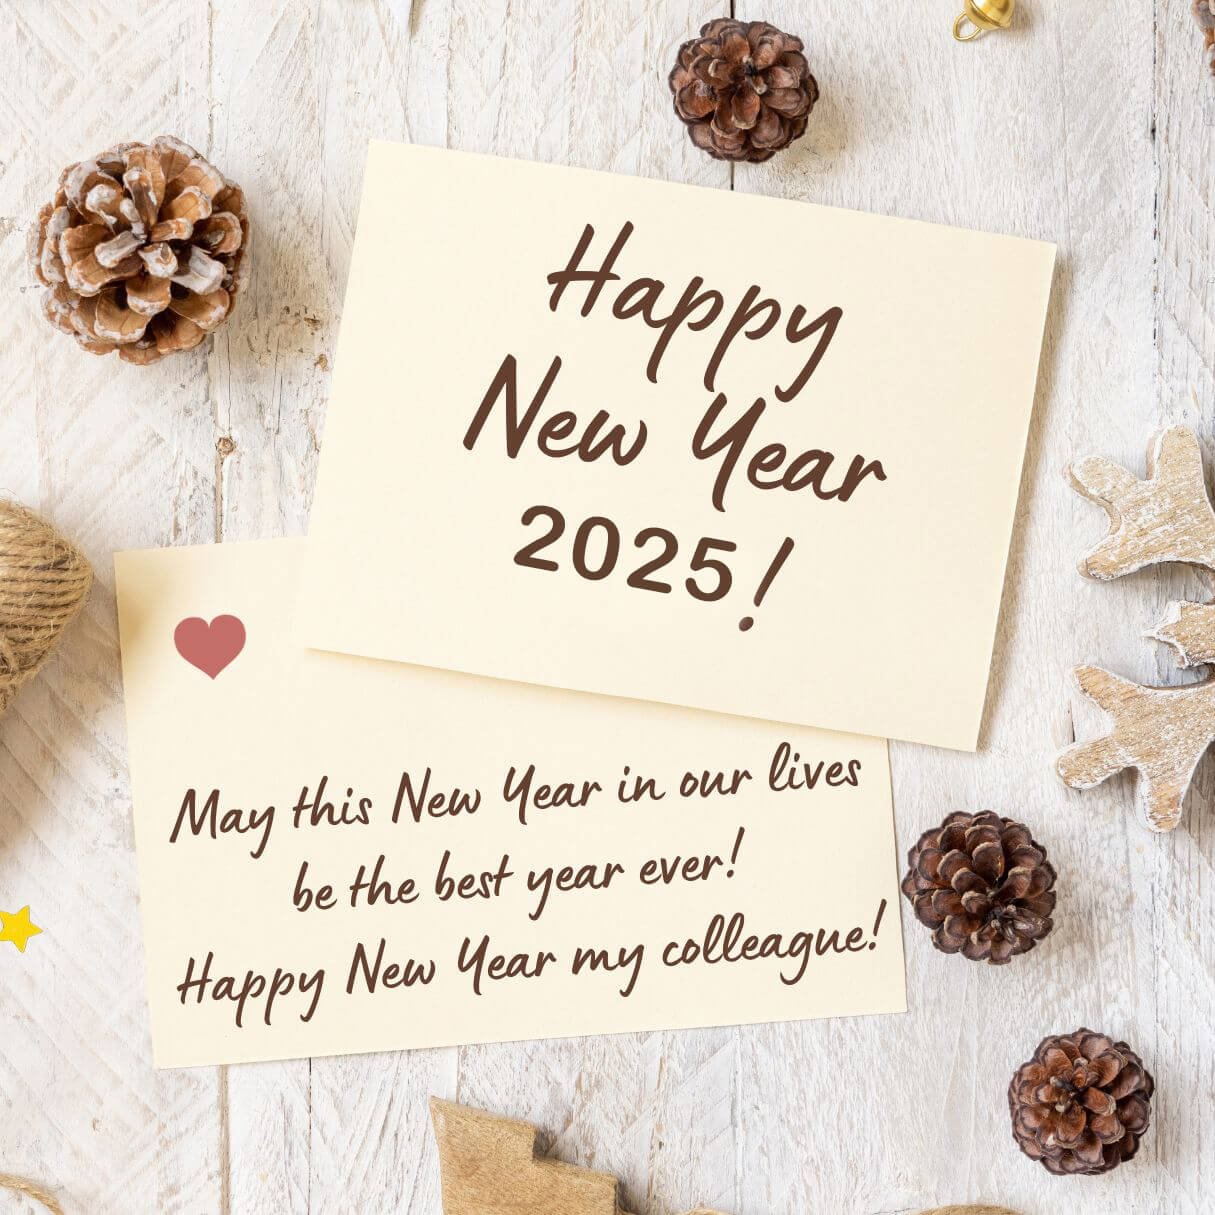 New Year Wishes For Coworkers 2025